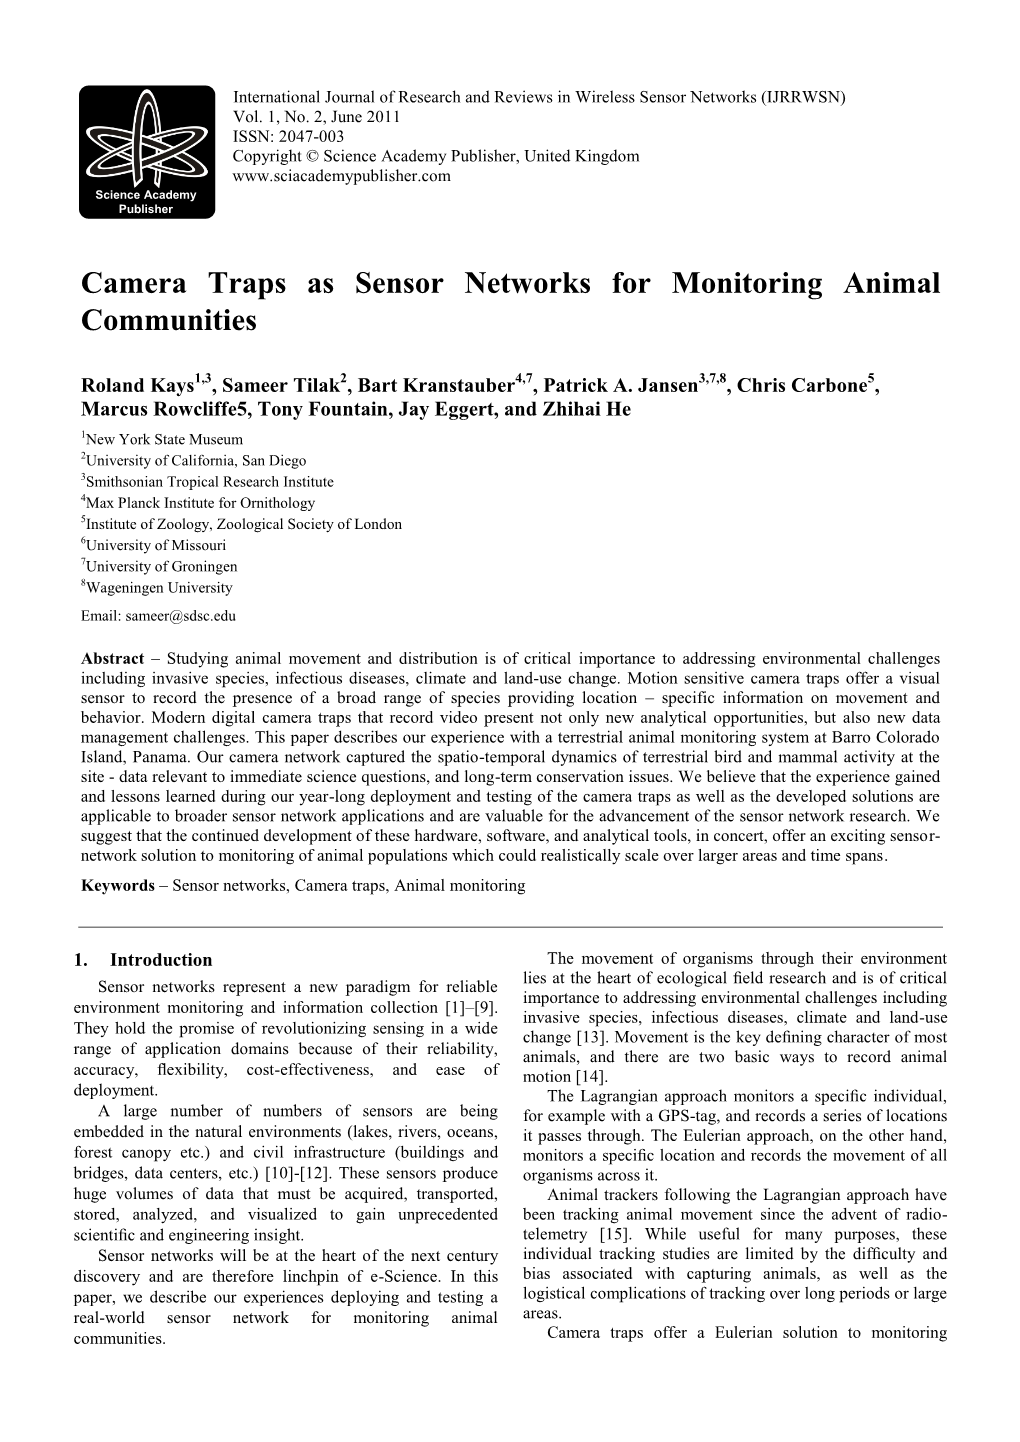 Camera Traps As Sensor Networks for Monitoring Animal Communities